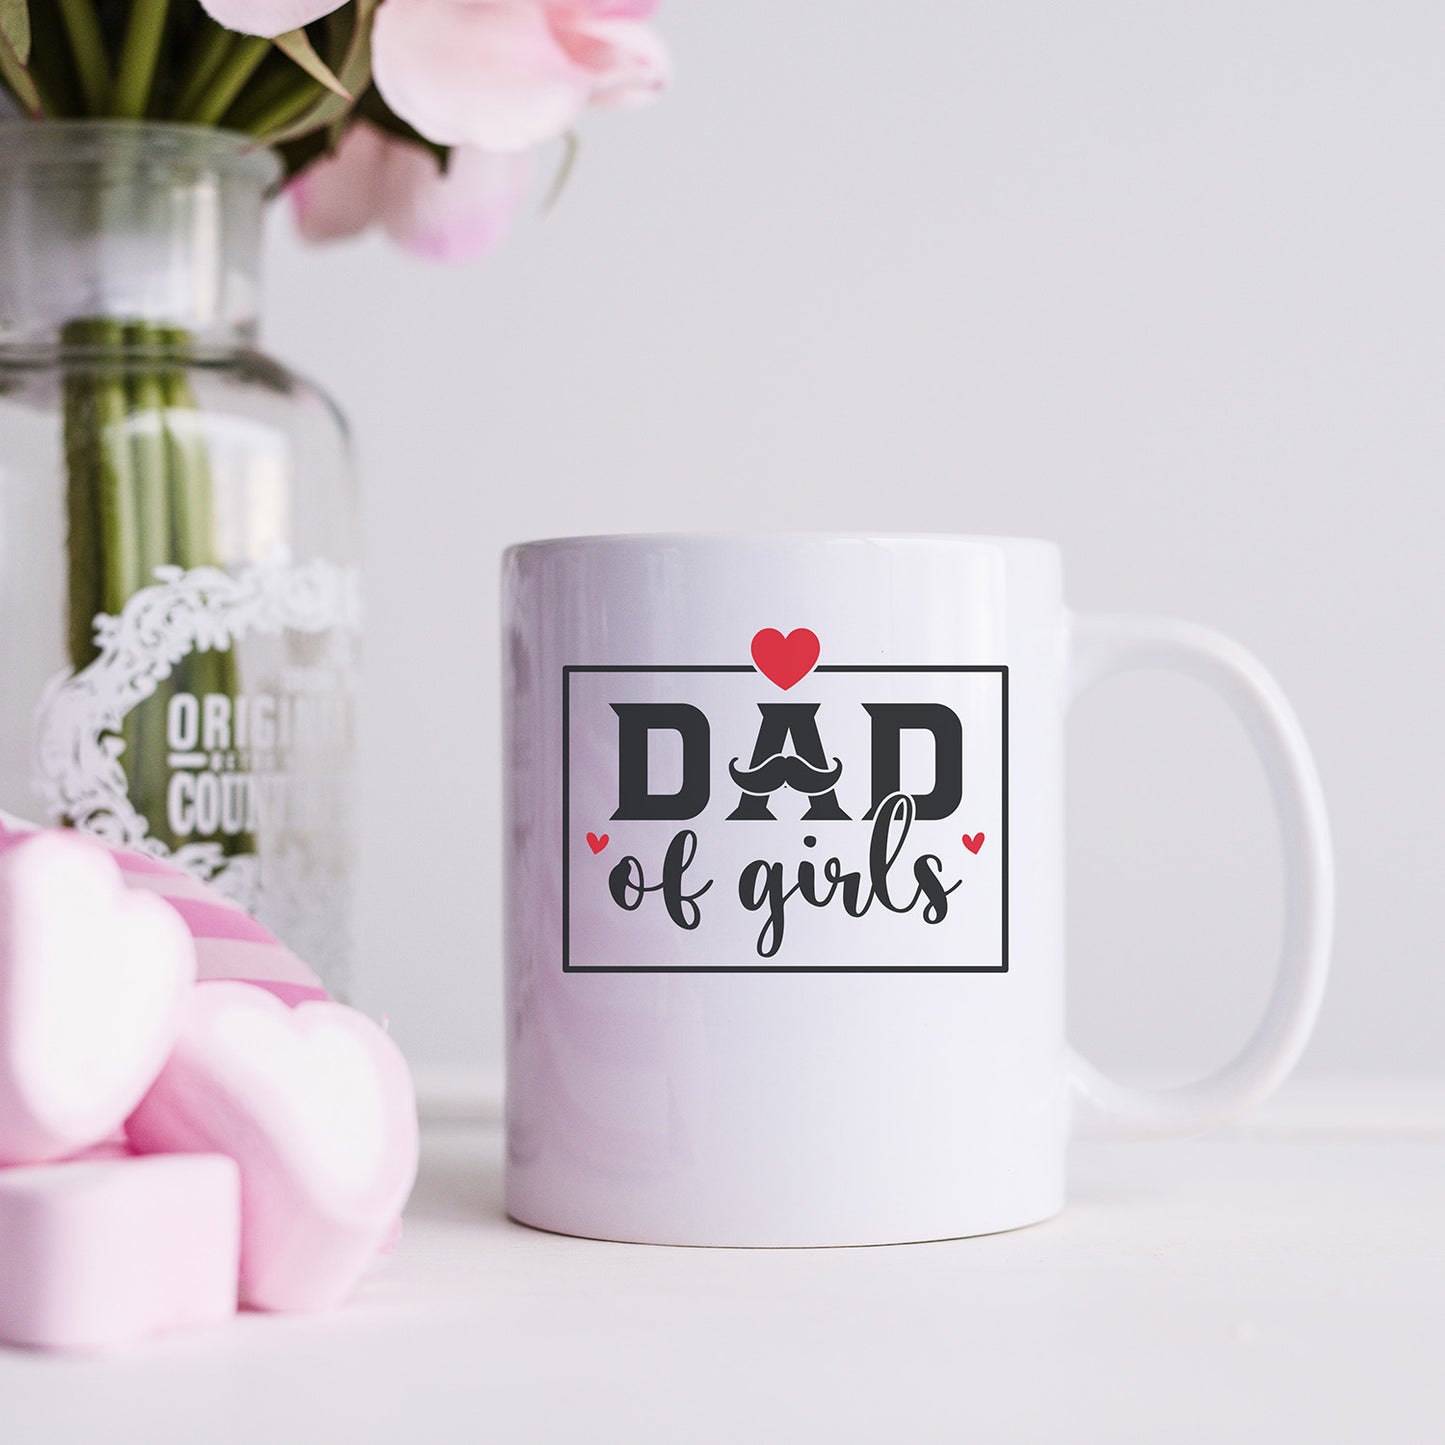 "Dad Of Girls" Graphic